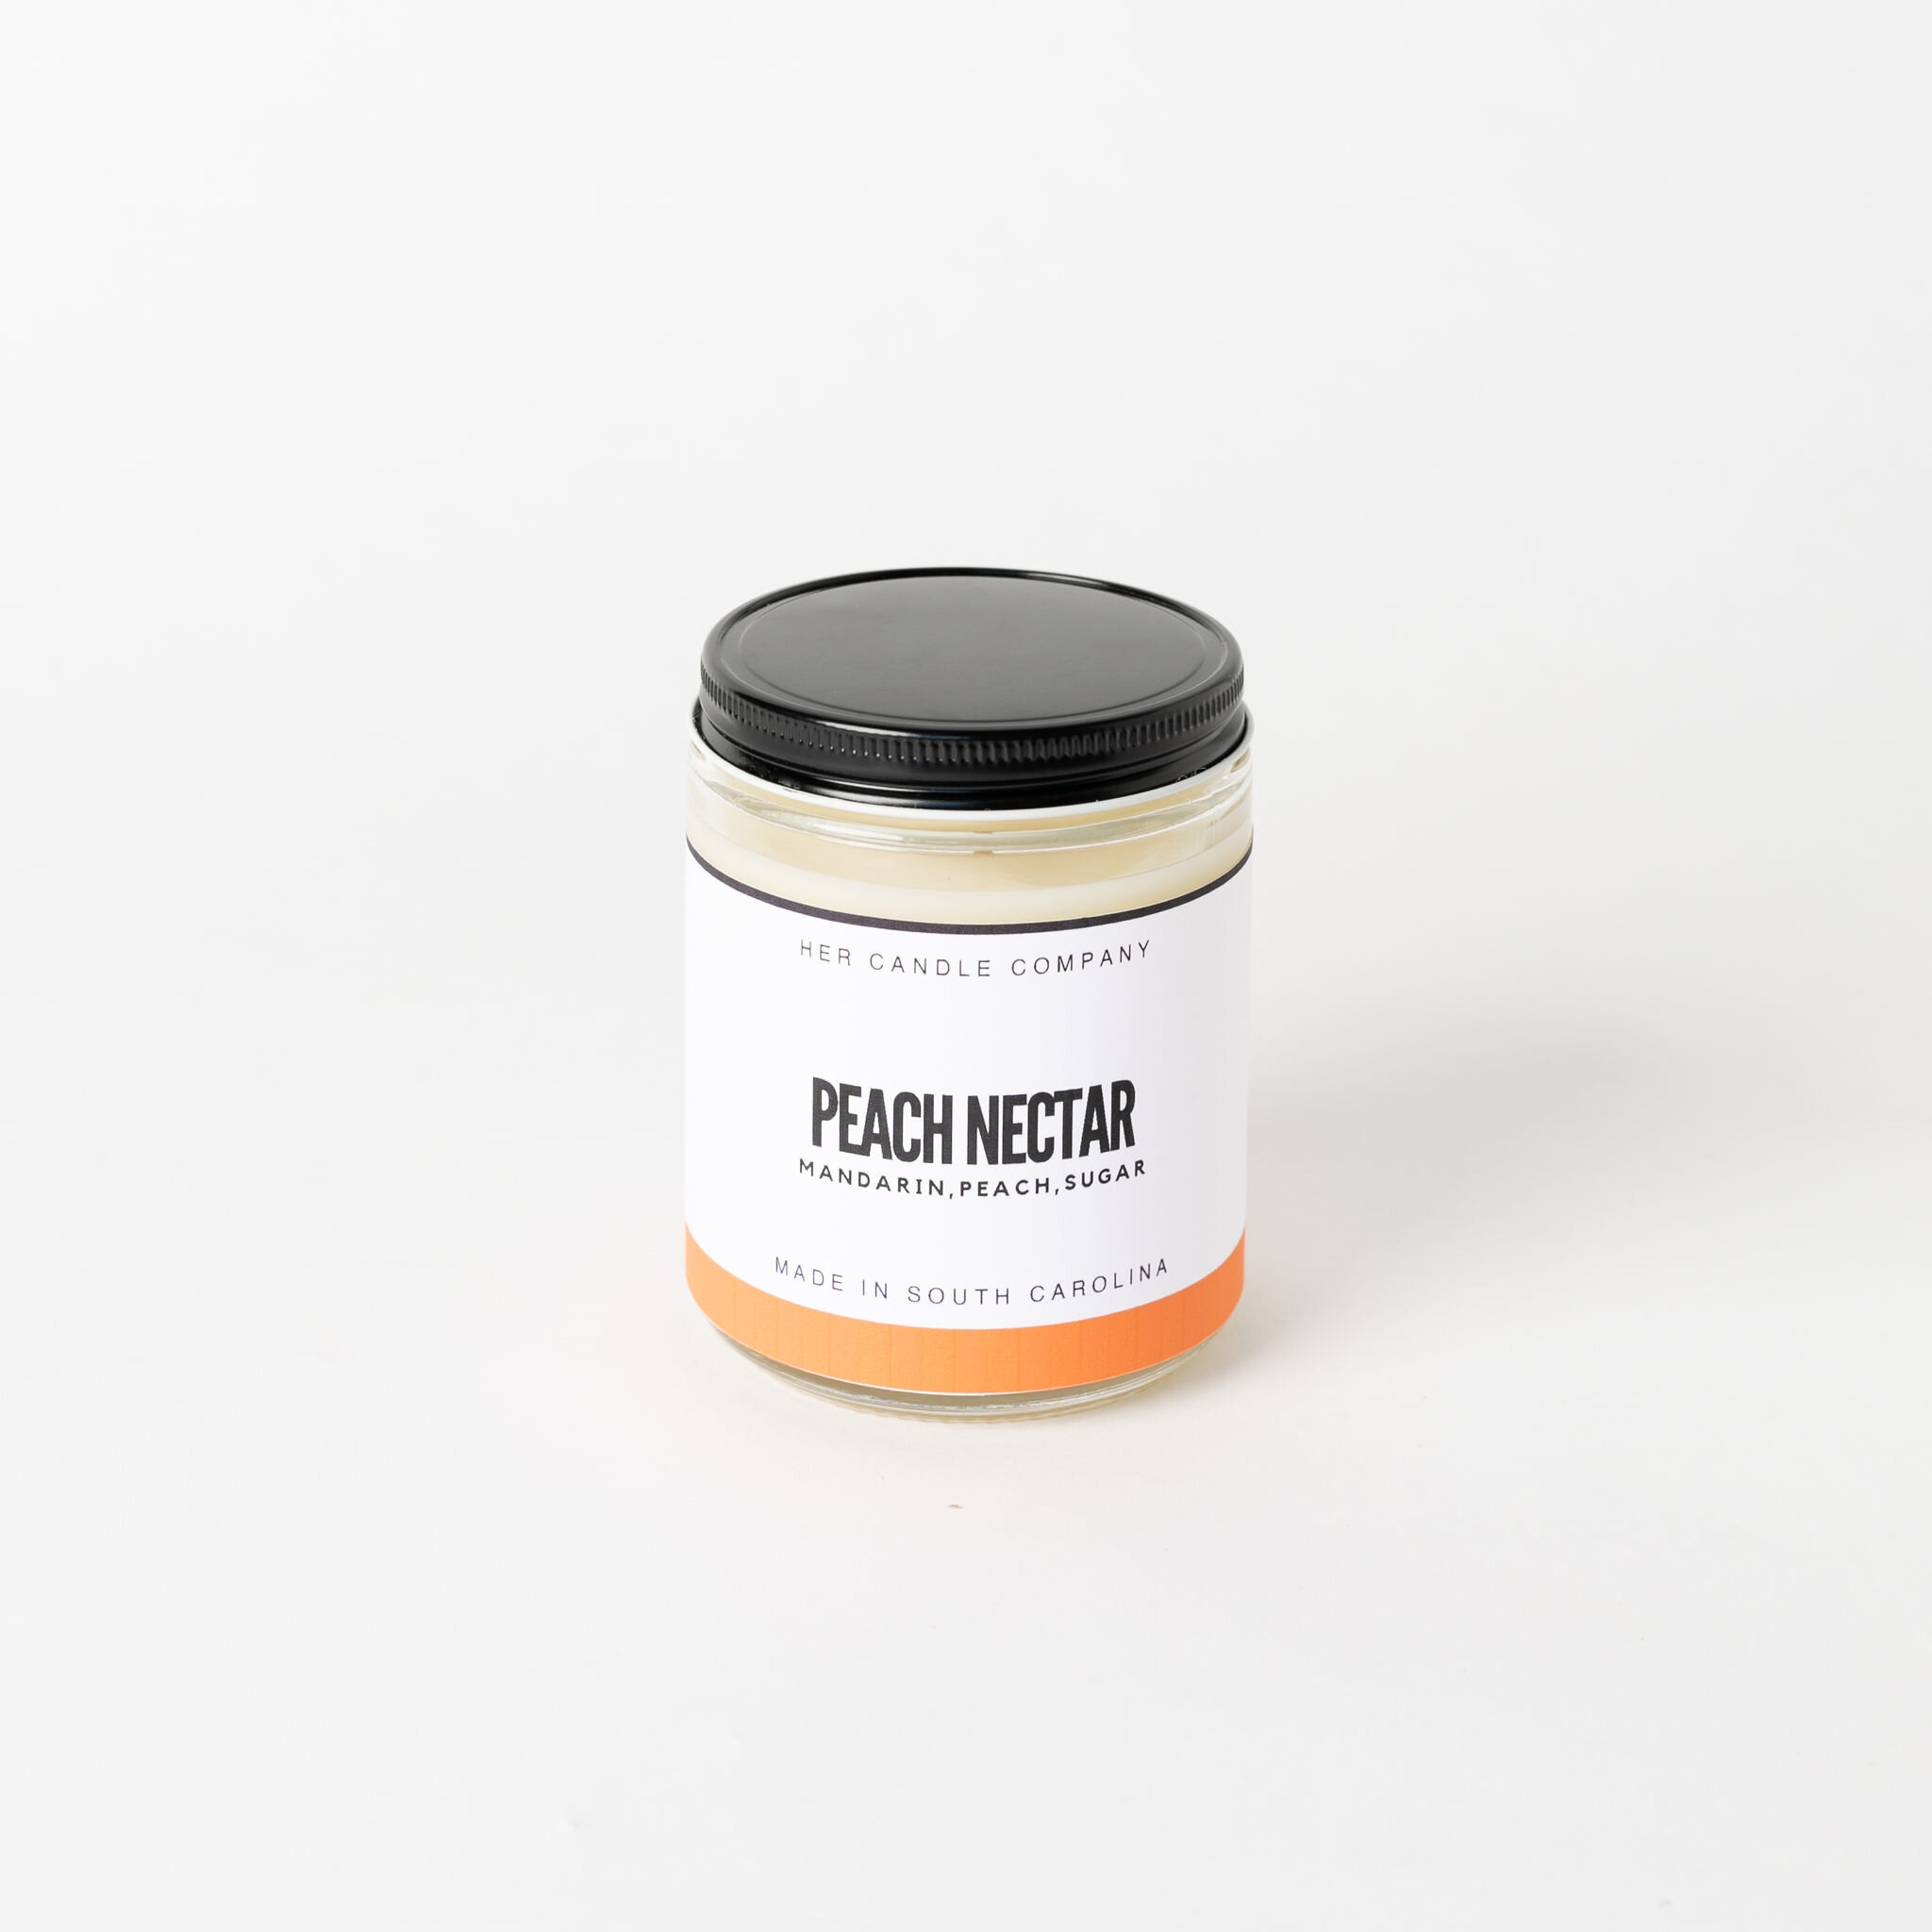 Branding &amp; product photography for candle companies in Charleston, South Carolina.